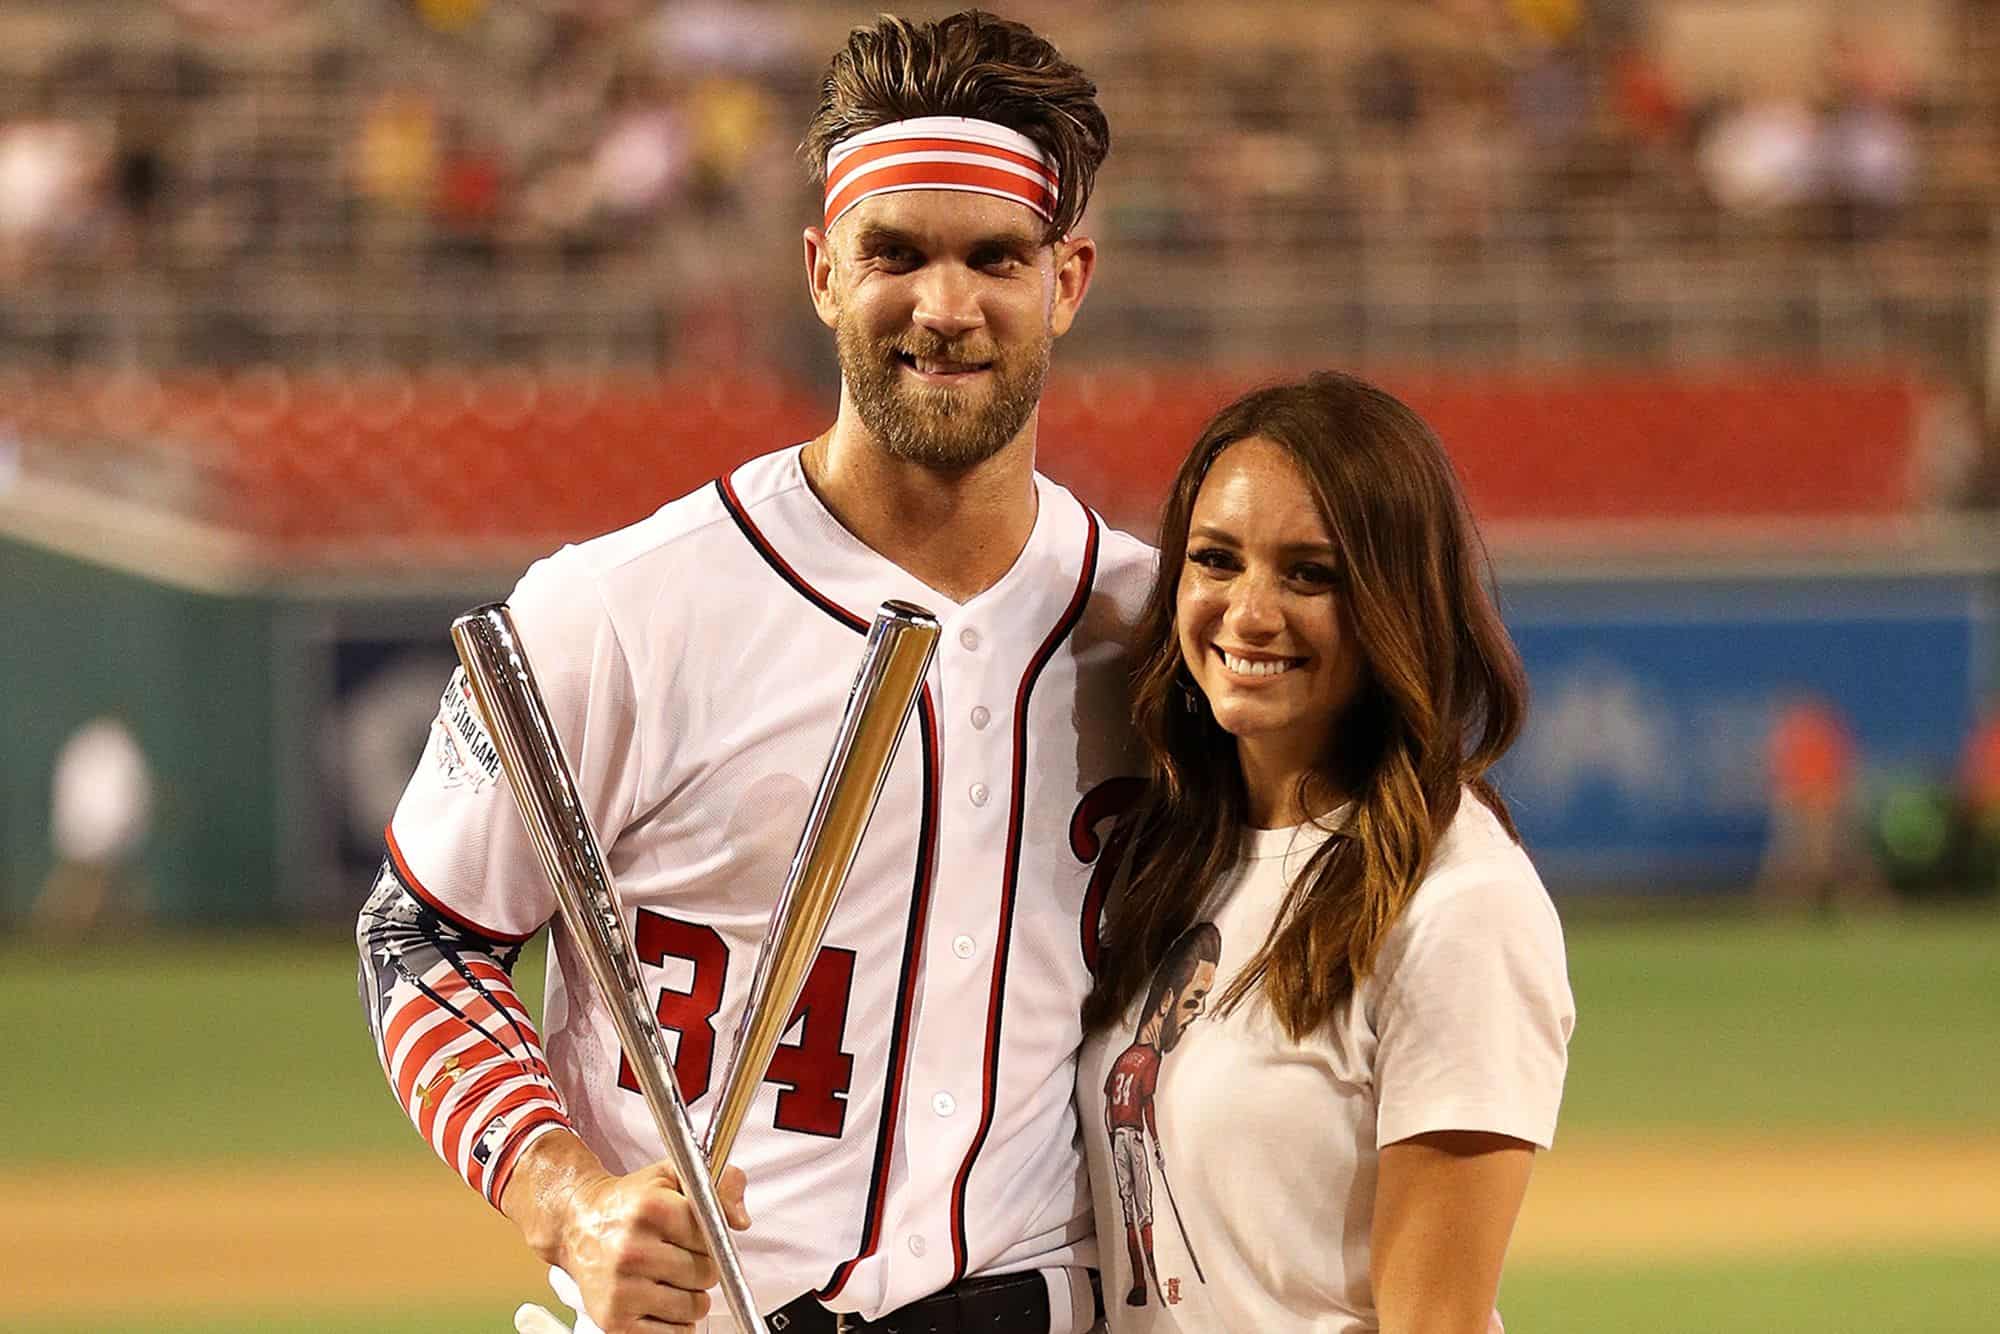 Bryce Harper with his wife, Kayla